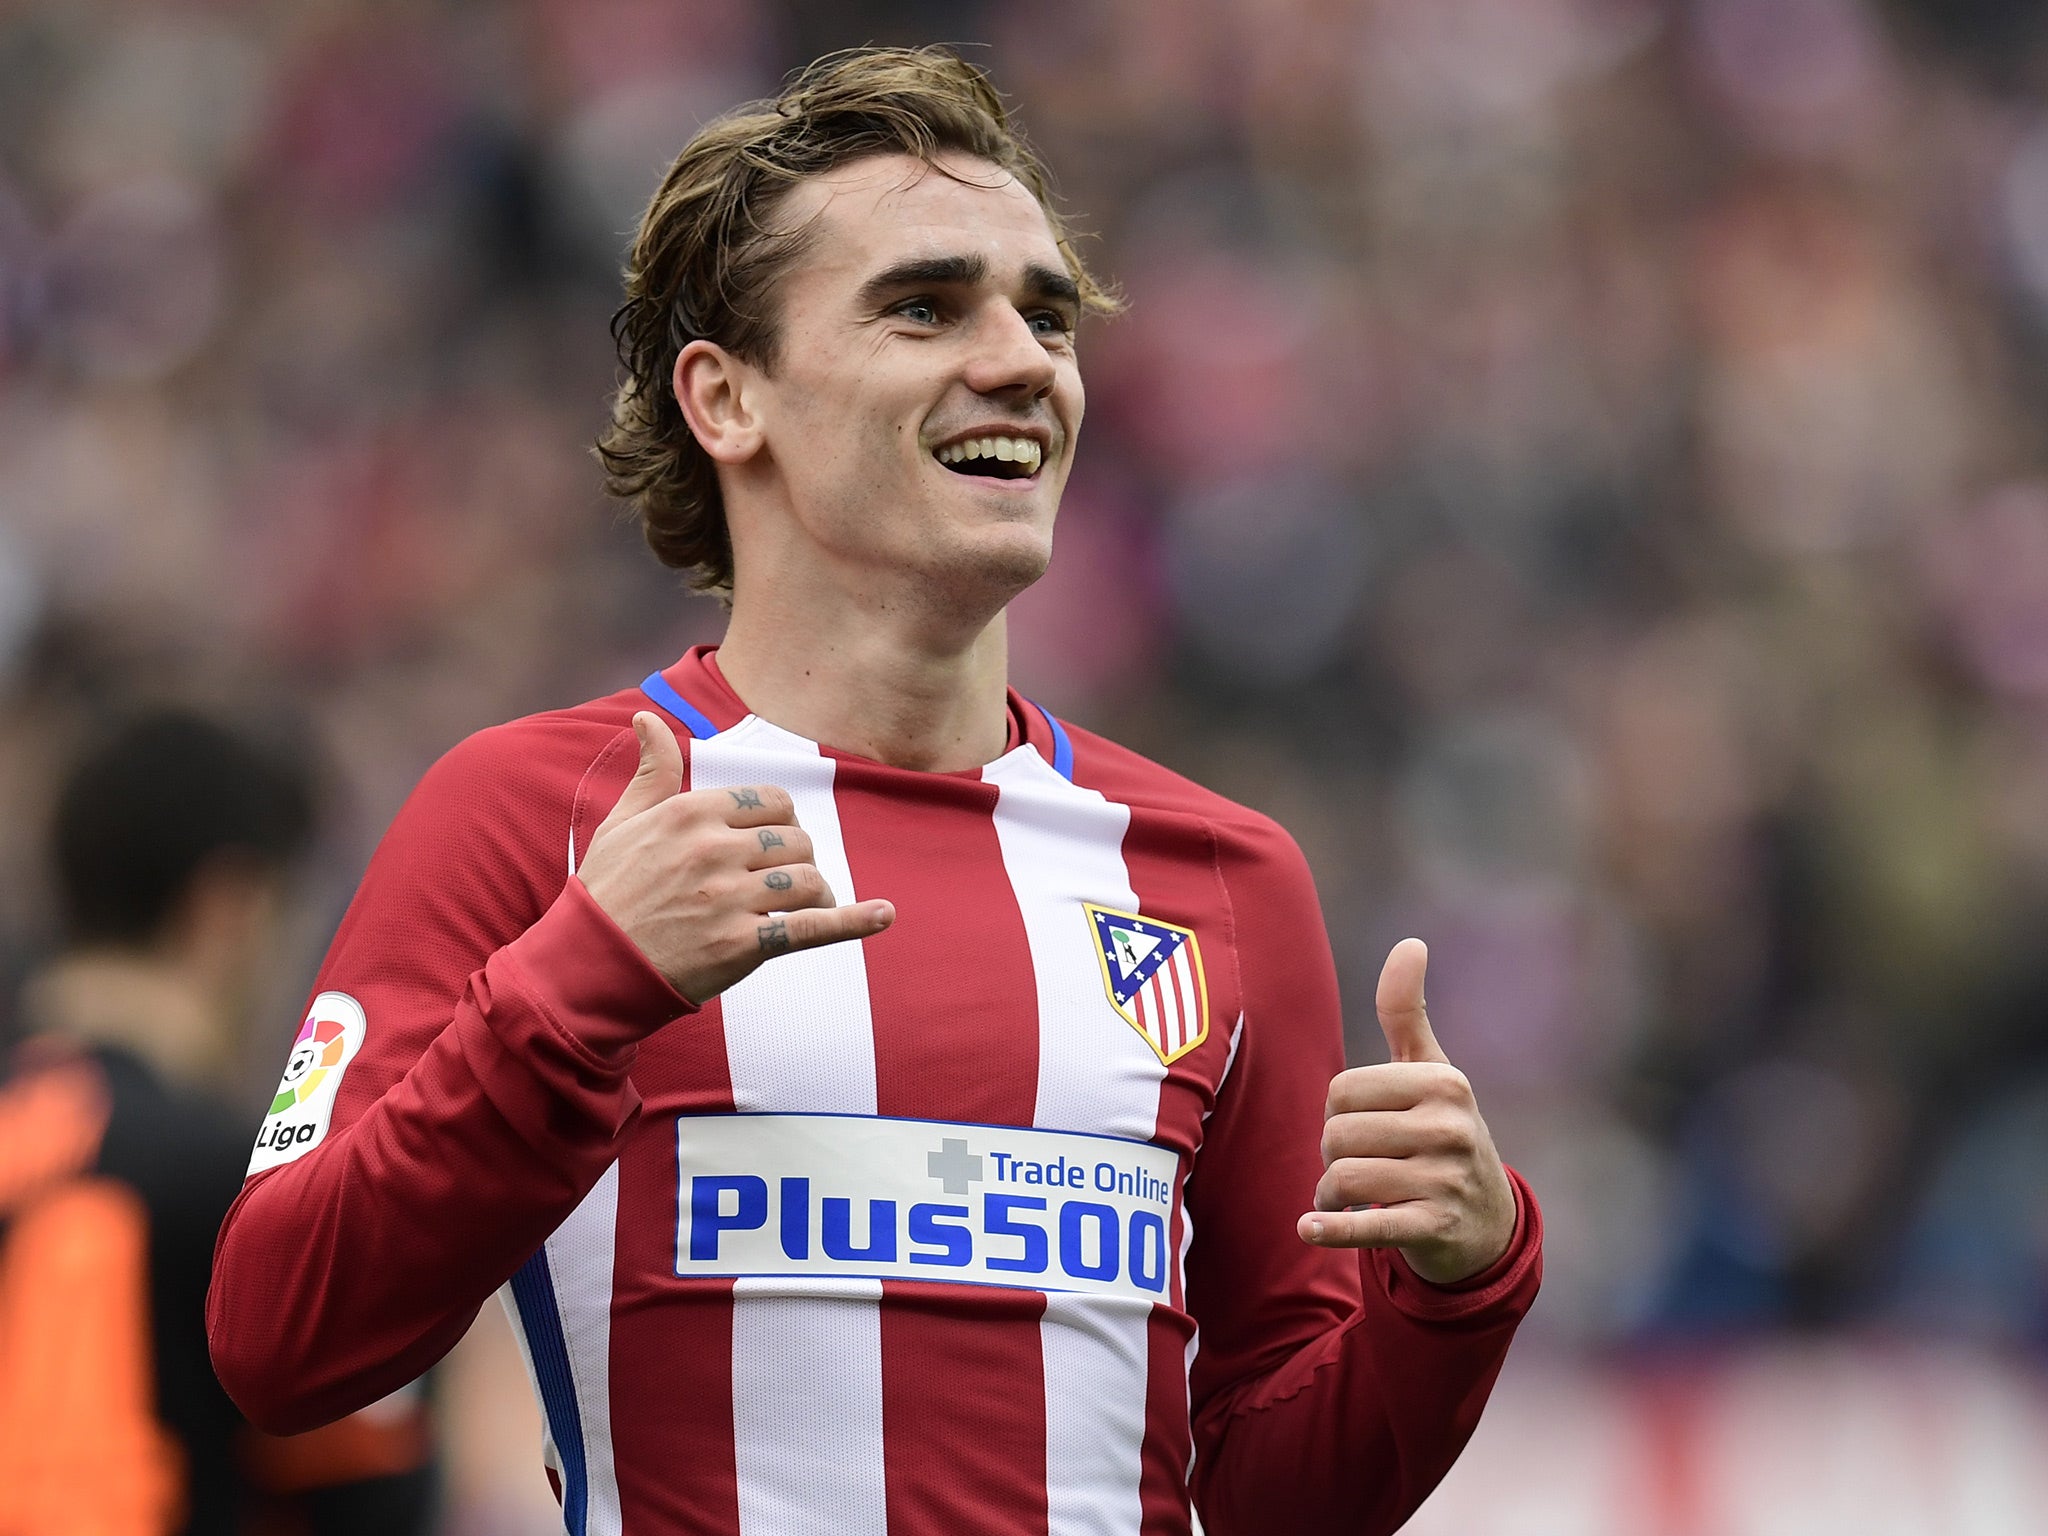 Antoine Griezmann was Manchester United's priority summer transfer target, but their attentions are now moving elsewhere